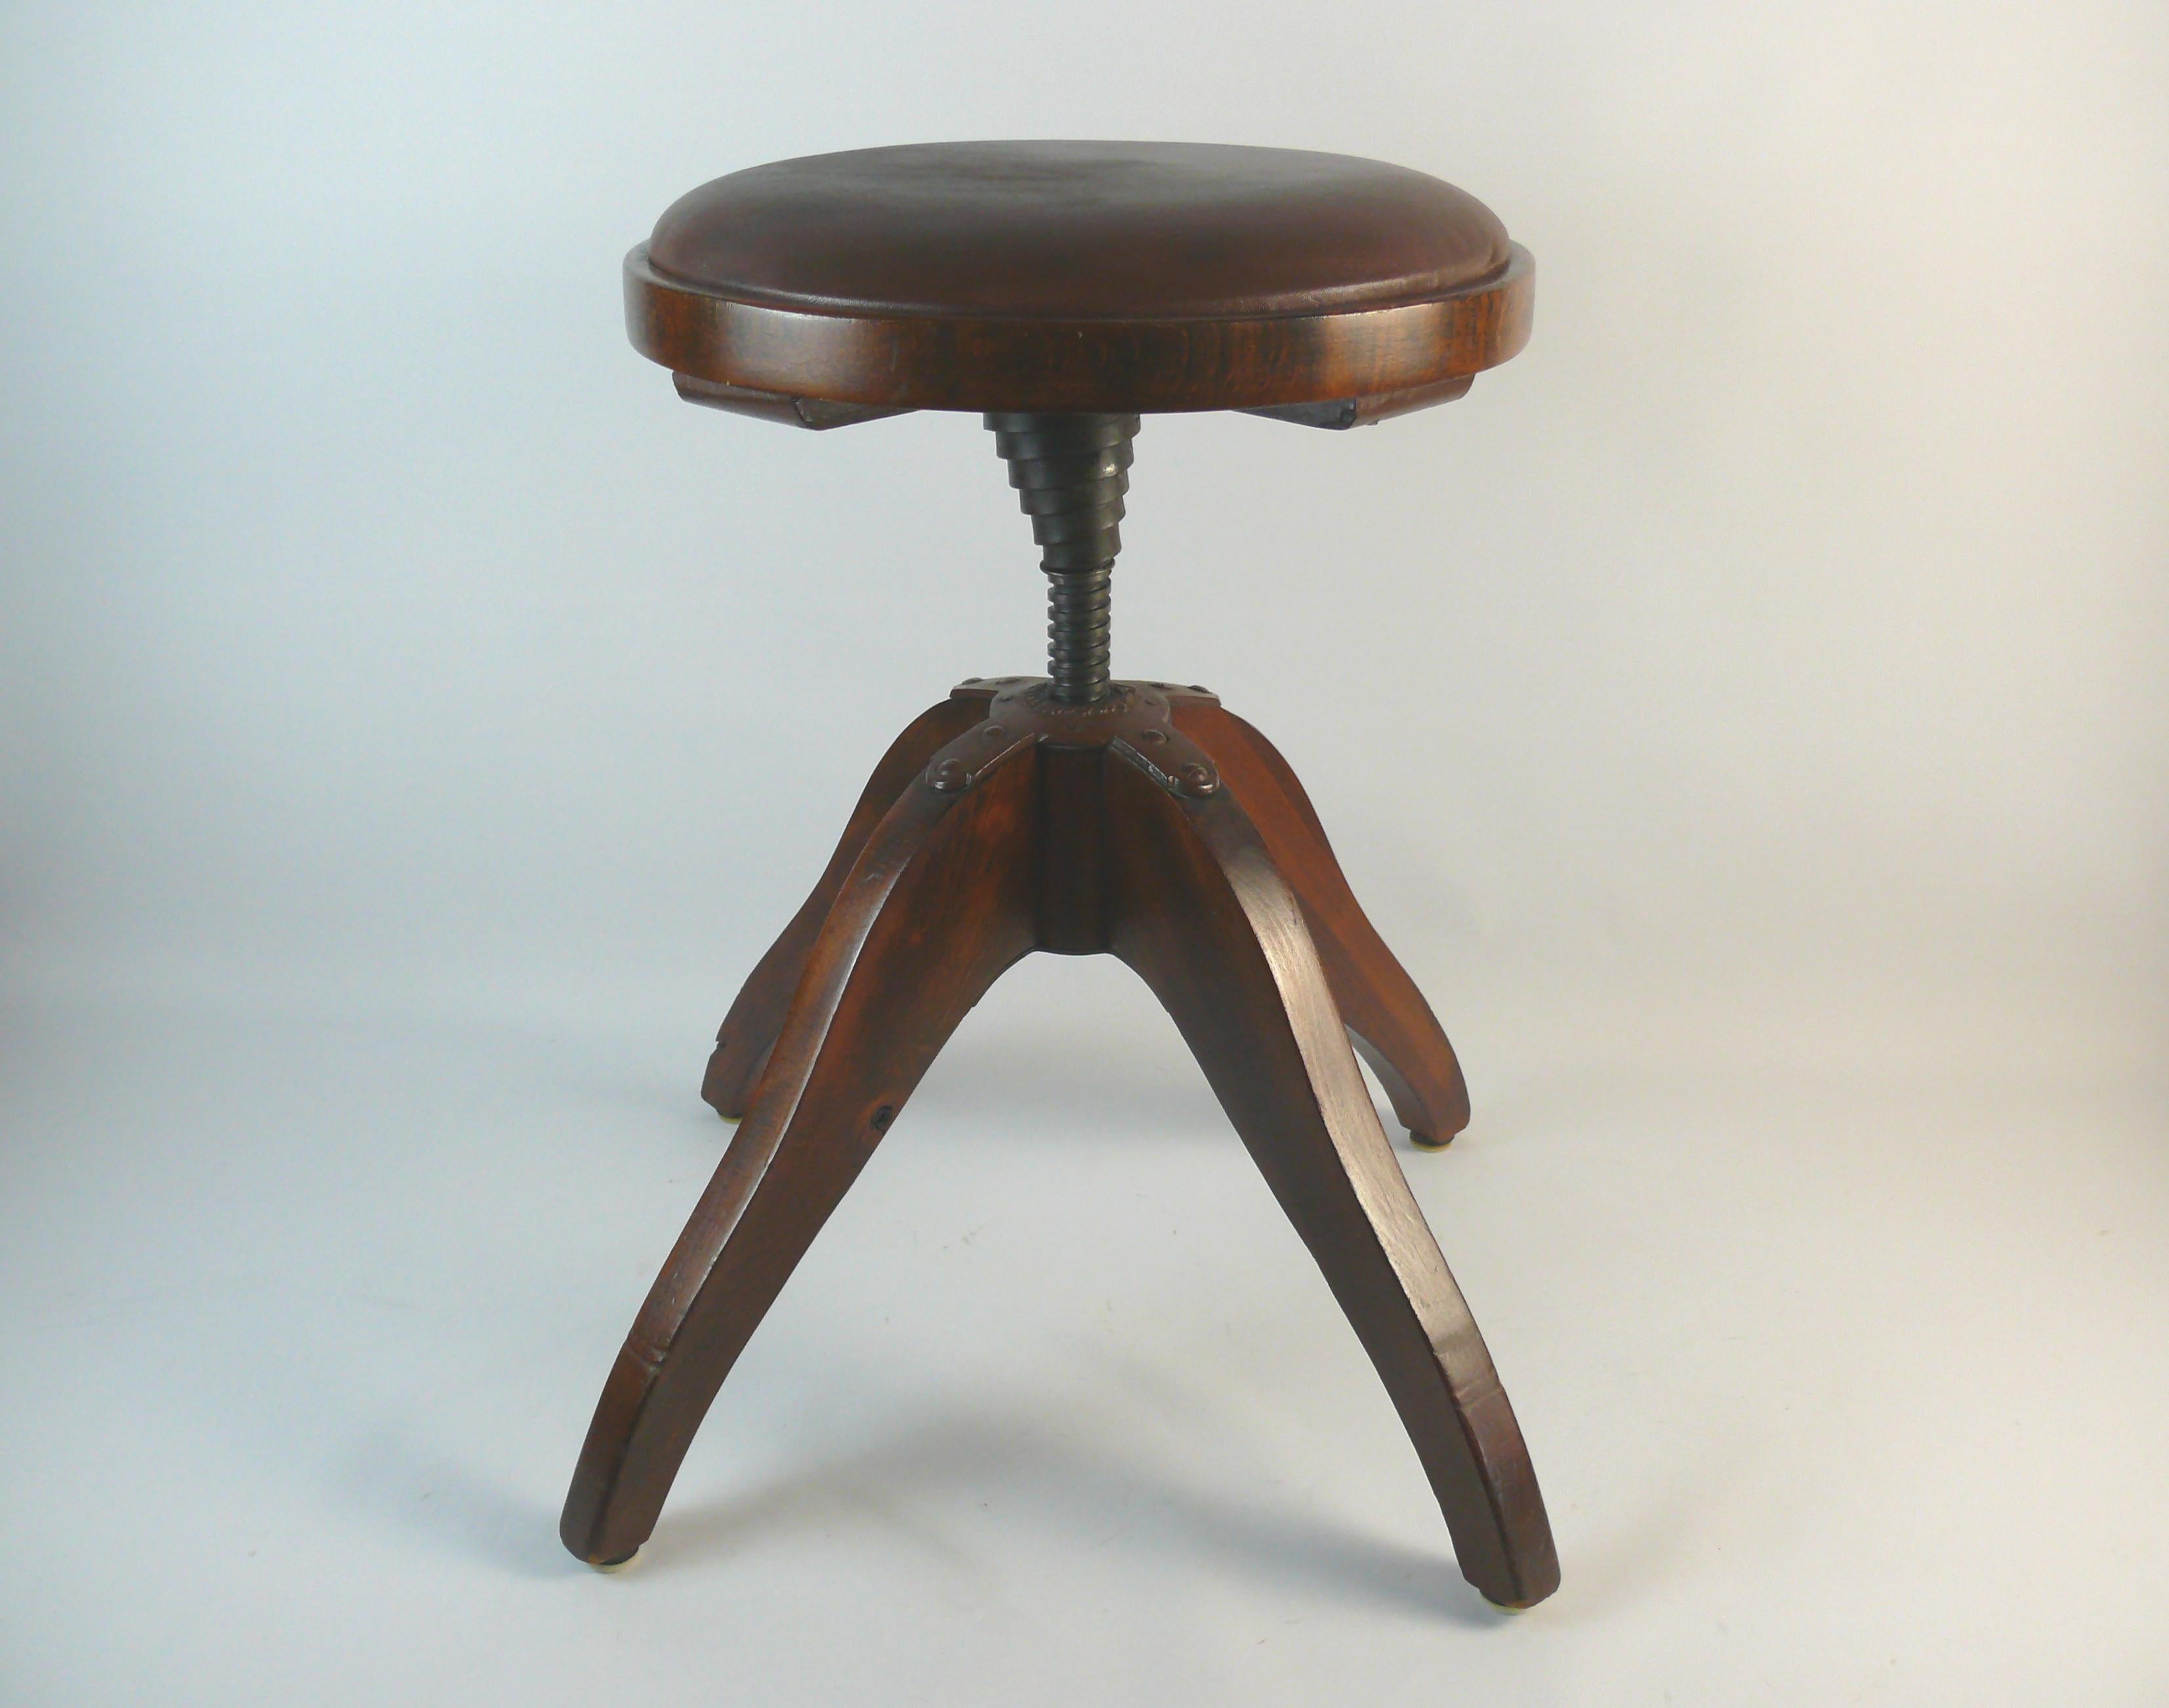 Brown, upholstered and spring-loaded swivel stool from the 1st half of the 20th century by Bombenstabil (Stoelcker KG Ettenheim). The suspension with the inscription: buffer rotation D.R.P. Bombproof. D.R.P. stands for German Reich Patent. The stool